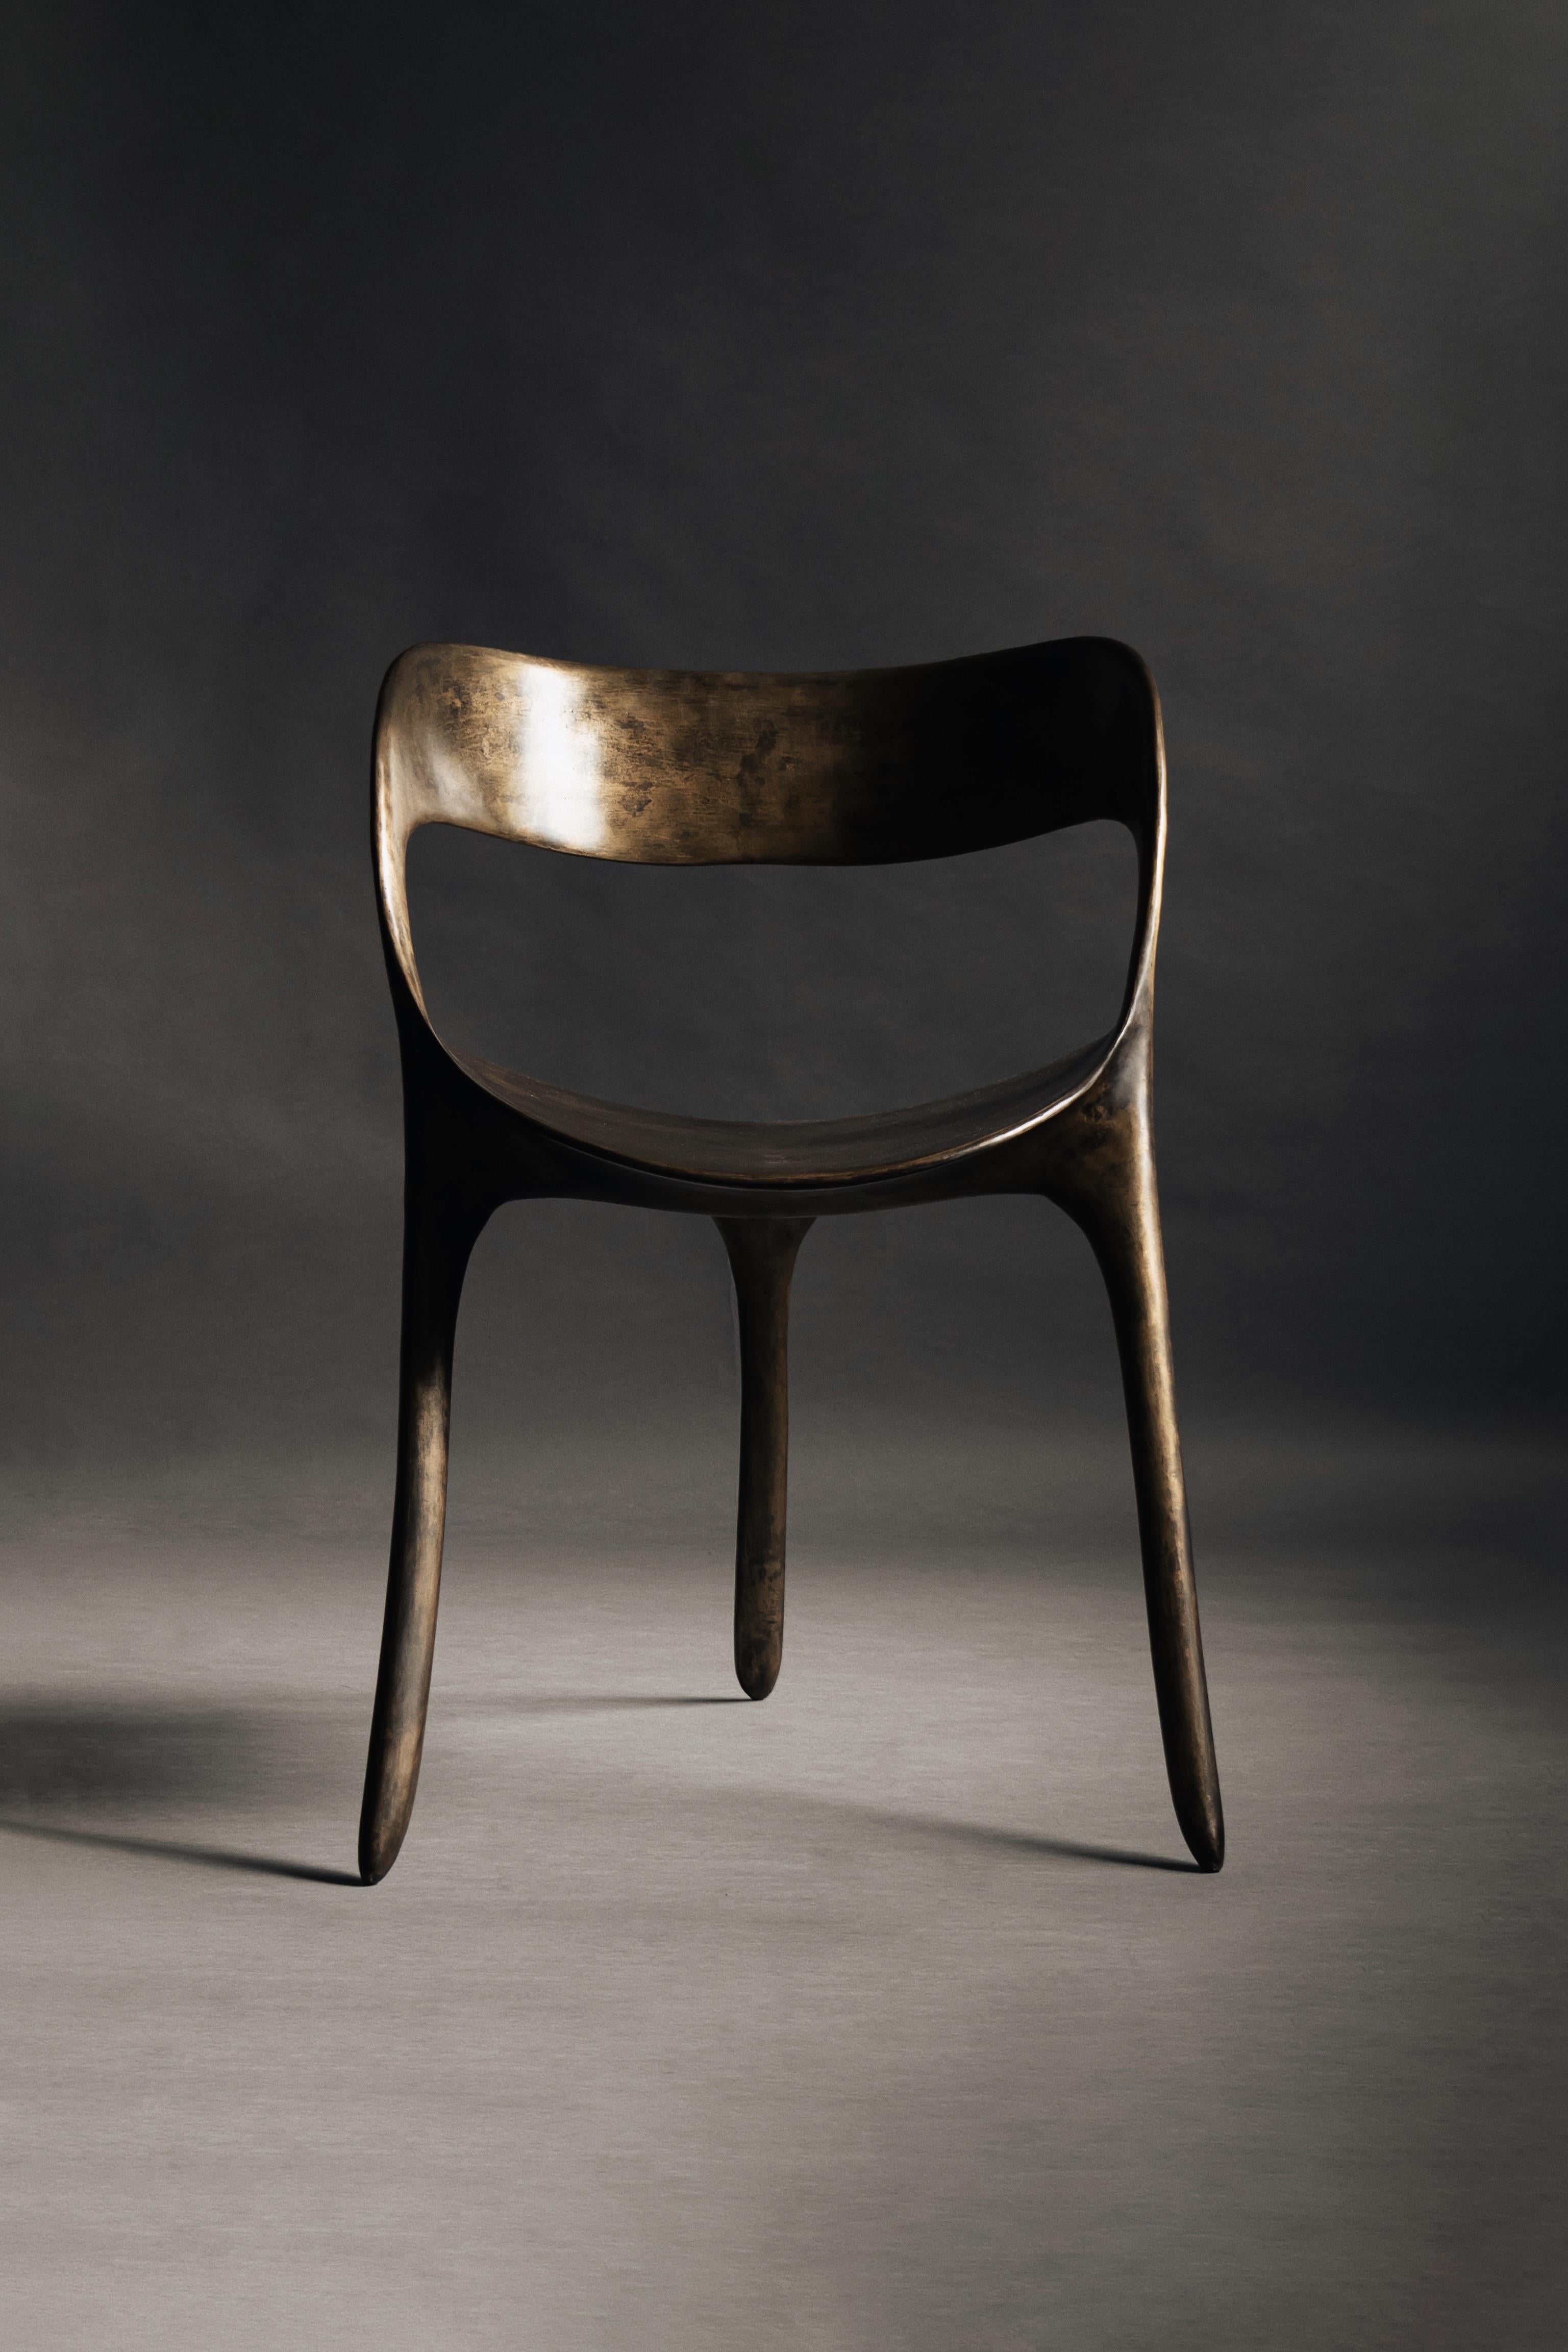 Frequency Chair by Sebastián Angeles
Material: Bronze, Silver Patina
Dimensions: W55 x D53 x H76 cm
Weight: 28 kg
Available in other finish.

The collection includes designs inspired by patterns that represent different sound frequencies and their